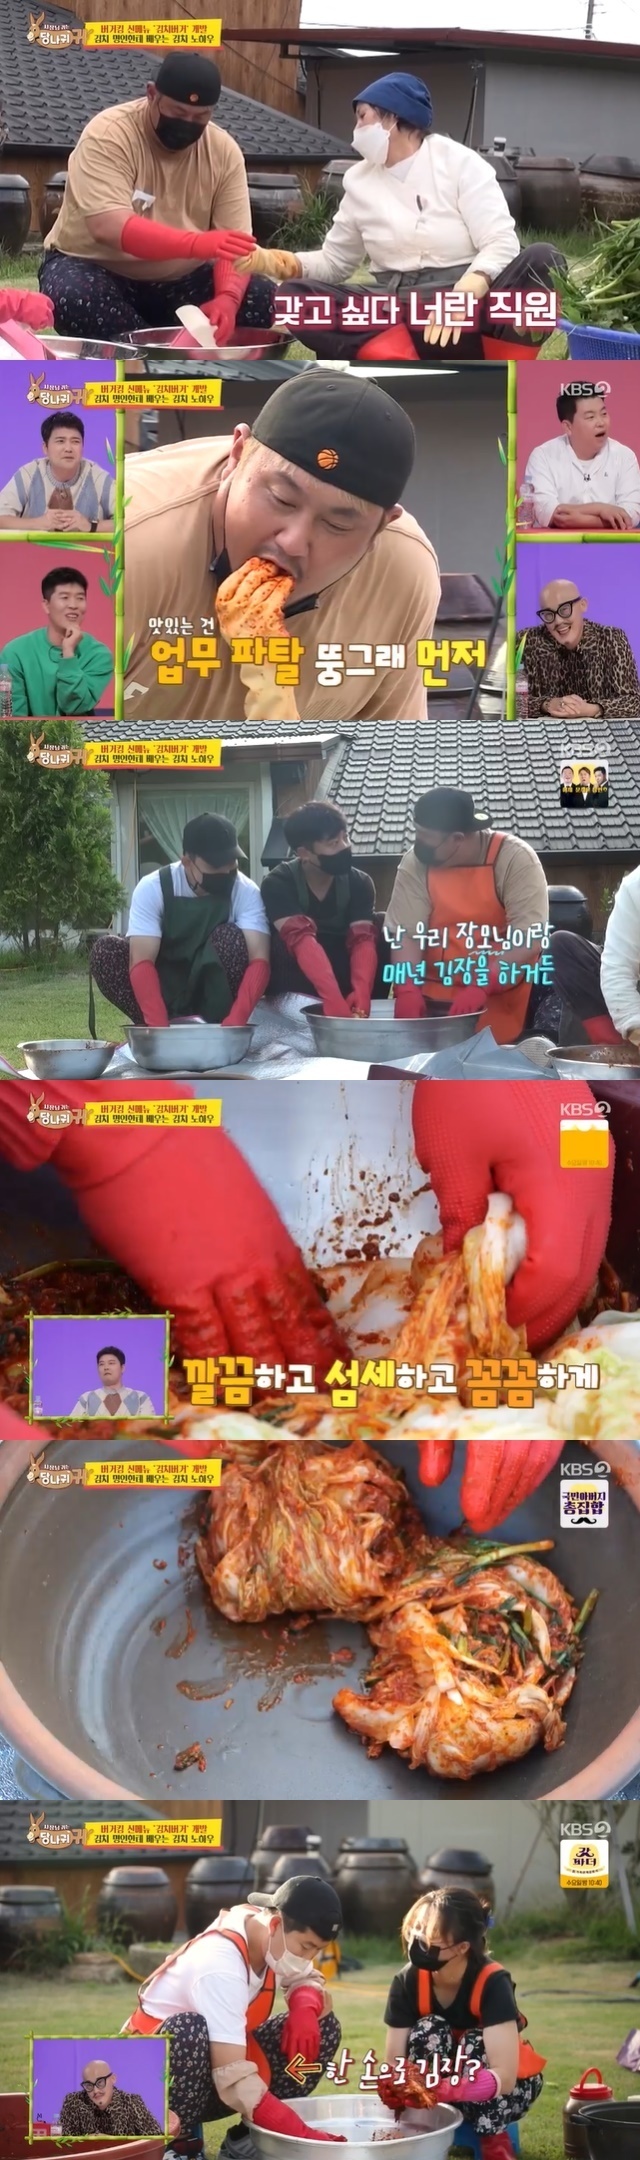 Jun-seok Choi made Kimchi name India love with his mother-in-law and Kim Jang-jin every year.In the 131st KBS 2TV entertainment Boss in the Mirror (hereinafter referred to as Donkey Ear) broadcast on November 14, Jun-seok Choi caught up with all the bosses of the studio as well as the heart of the kimchi master.On this day, Kim Byung-hyun visited Kim Hyo-sook, a kimchi master, to learn the process of making kimchi for the purpose of developing kimchi burgers.The kimchi master, who has a history of runner-up in the Presidential Prize, was making Napa cabbage directly in a 400-pyeong field and making delicious kimchi with his own secret.The master generously released secrets such as Kim Byung-hyun, a burger worker, and the new The Internet Jun-seok Choi, adjusting the liver with raw salted fish, catching sweetness with fermented liquid, and making a cool taste with hearing and buttercups.Kim Byung-hyun has been a problem child by leaving his workplace and smoking a prank while he has brought his employees, while Jun-seok Choi has captured the heart of the master with his natural physical strength and slick hands.So the master is the first to show the finished seasoning taste to Jun-Seok Choi.Jun-seok Choi told the employee who said it is not easy to mix Napa cabbage with seasoning, saying, I Kimchi with my mother-in-law every year. He gave me a way to put the seasoning in a beautiful seasoning and roll Napa cabbage.At the same time, Kim Byung-hyun laughed with a hand that was roughly Kim Jang-ha.Napa cabbage kimchi, gourd, and gourd kimchi of the day ended in five full hours with Jun-seok Chois performance.Love calls poured into Jun-Seok Choi.Especially, recently, the chef Jeong Ho-young, who lacks hands at Jeju, asked Kim Byung-hyun to call Jun-seok Chois phone number.Kim Byung-hyun laughed at Jun-Seok Chois phone number by blocking the outflow of manpower with a no-holds-barred note.Kim Byung-hyun, who got a talent that everyone coveted in such a way, then had a pleasant unity with his employees, shouting Tado Jeong Ho-young with Can Education.It is noteworthy whether Kim Byung-hyun, the boss who has been properly transferred from the master, and the employees, The International Jun-seok Choi, will succeed in developing kimchi burgers.